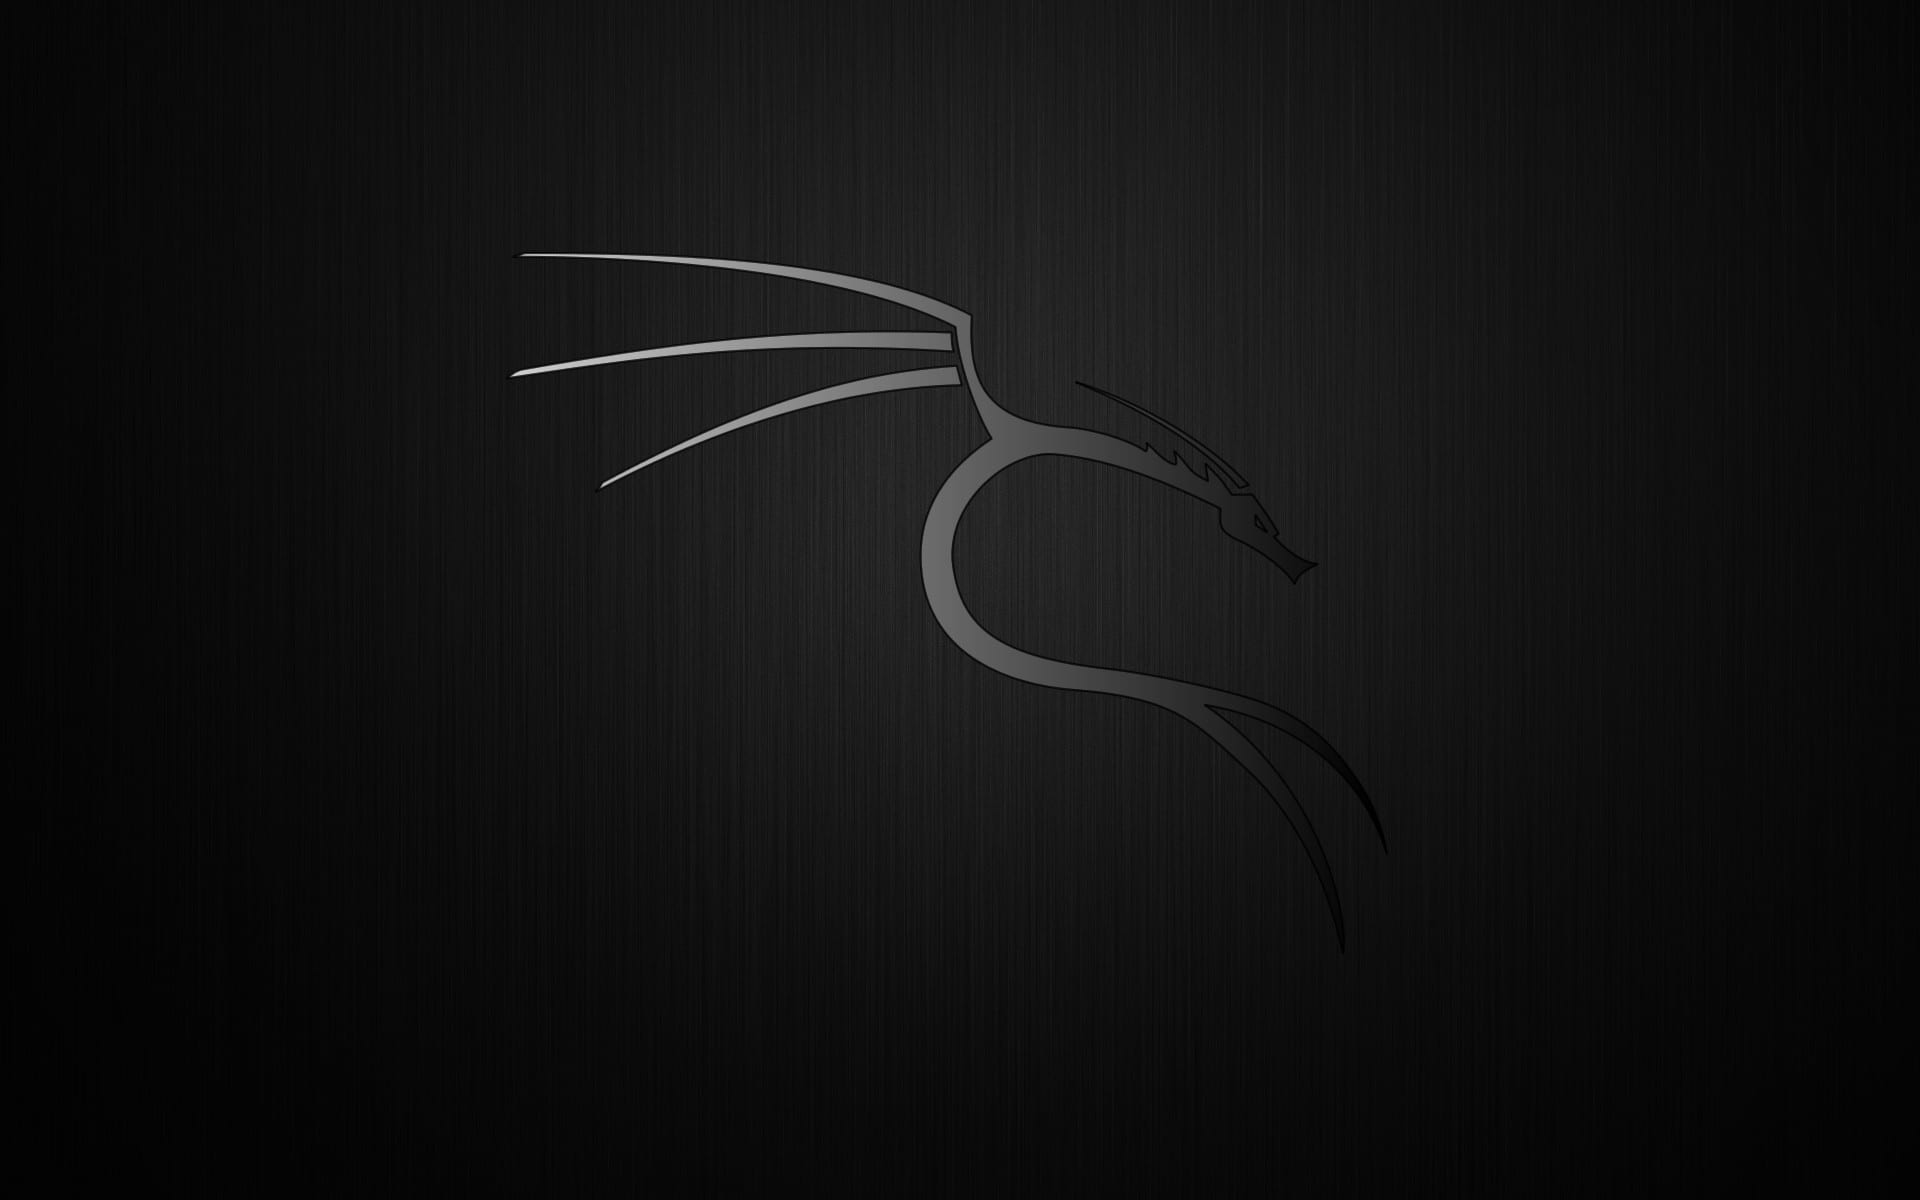 download the new for mac Kali Linux